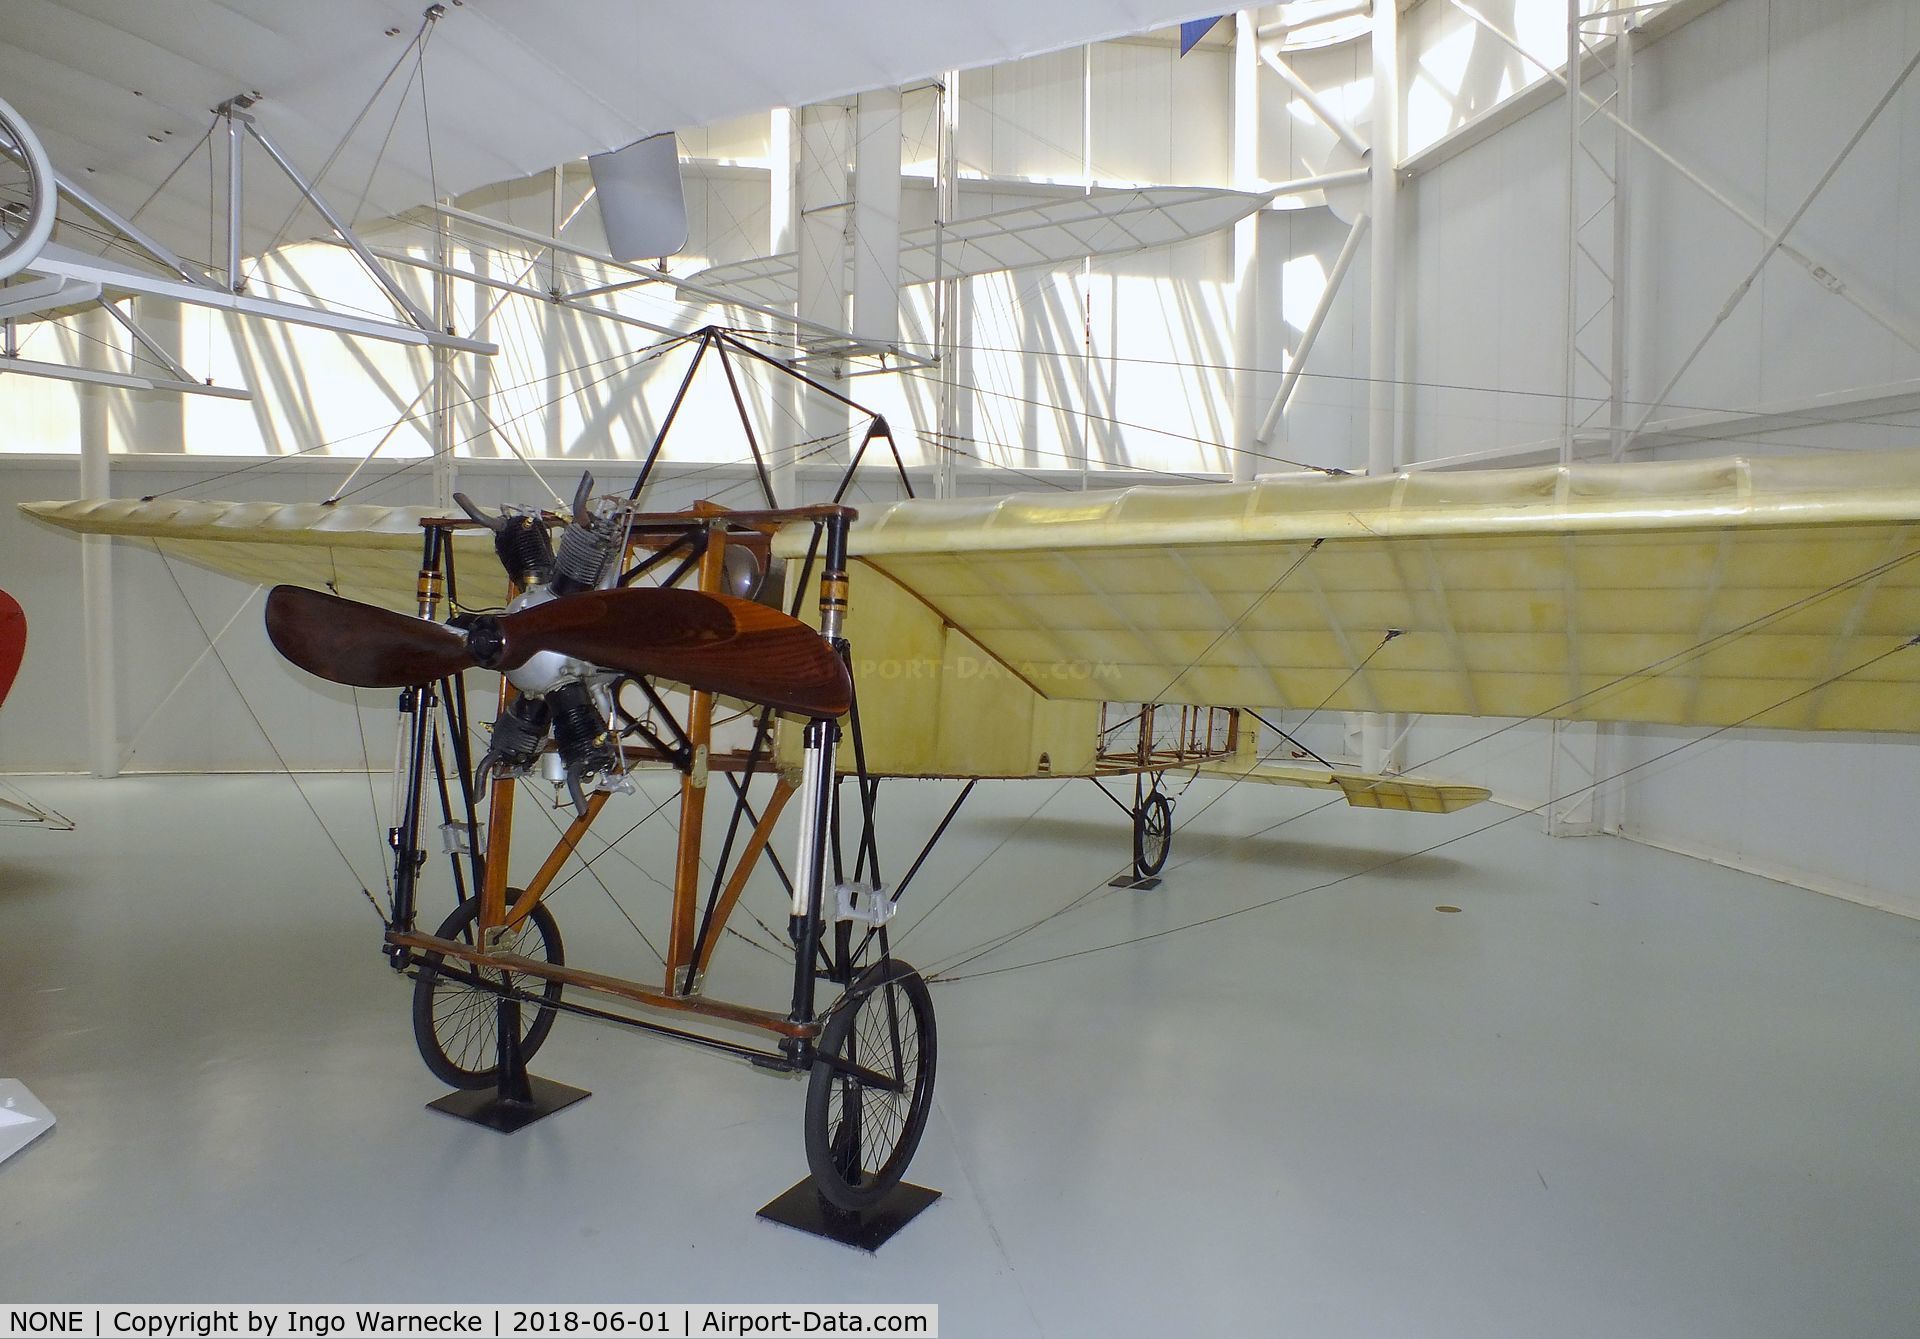 NONE, Bleriot XI replica C/N None, Bleriot XI replica at the US Army Aviation Museum, Ft. Rucker